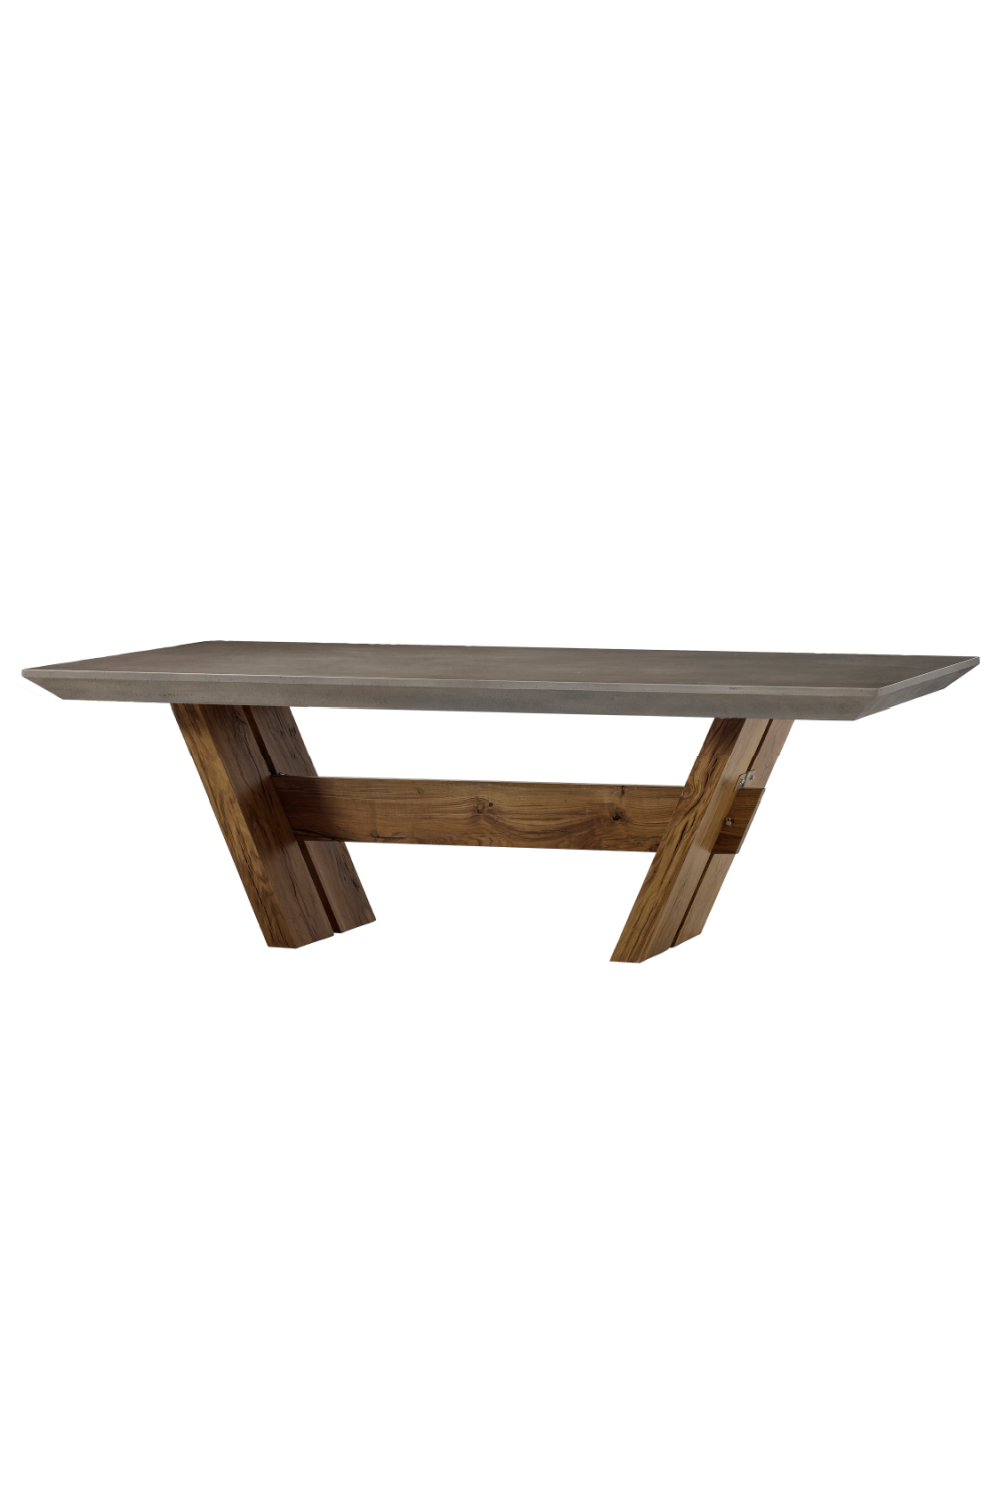 Light Wooden Dining Table L | Andrew Martin Strand  | Woodfurniture.com